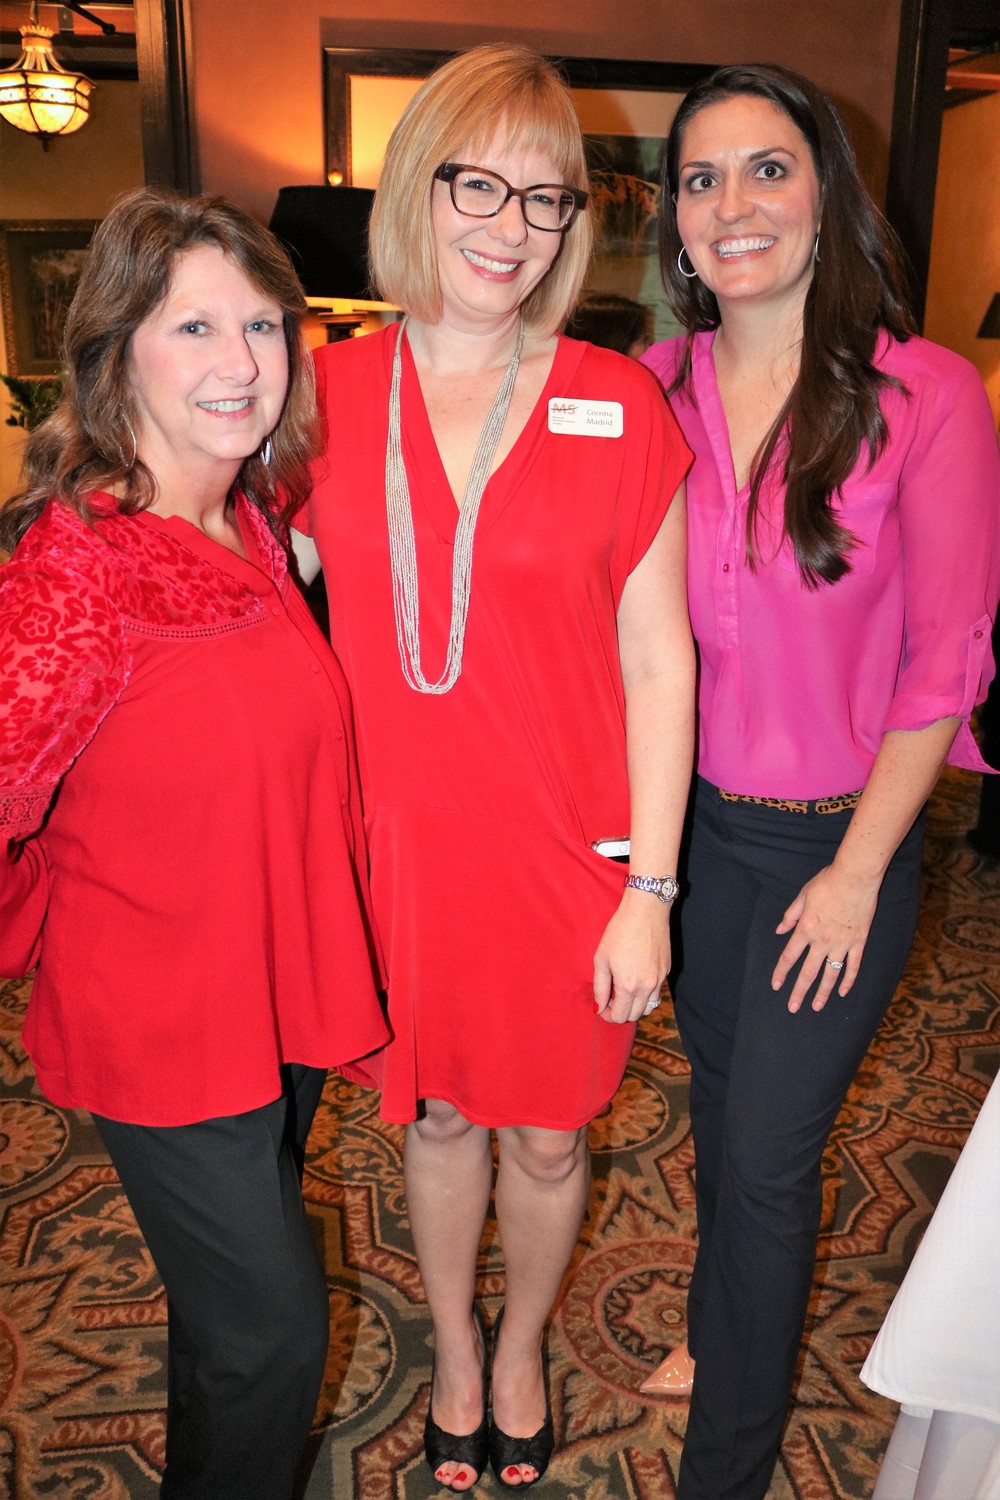 Corrina Madrid, director of foundation relations for the North Florida Chapter of the National Multiple Sclerosis Society (center), with (from left) Lynn Layton and Hilary Frank